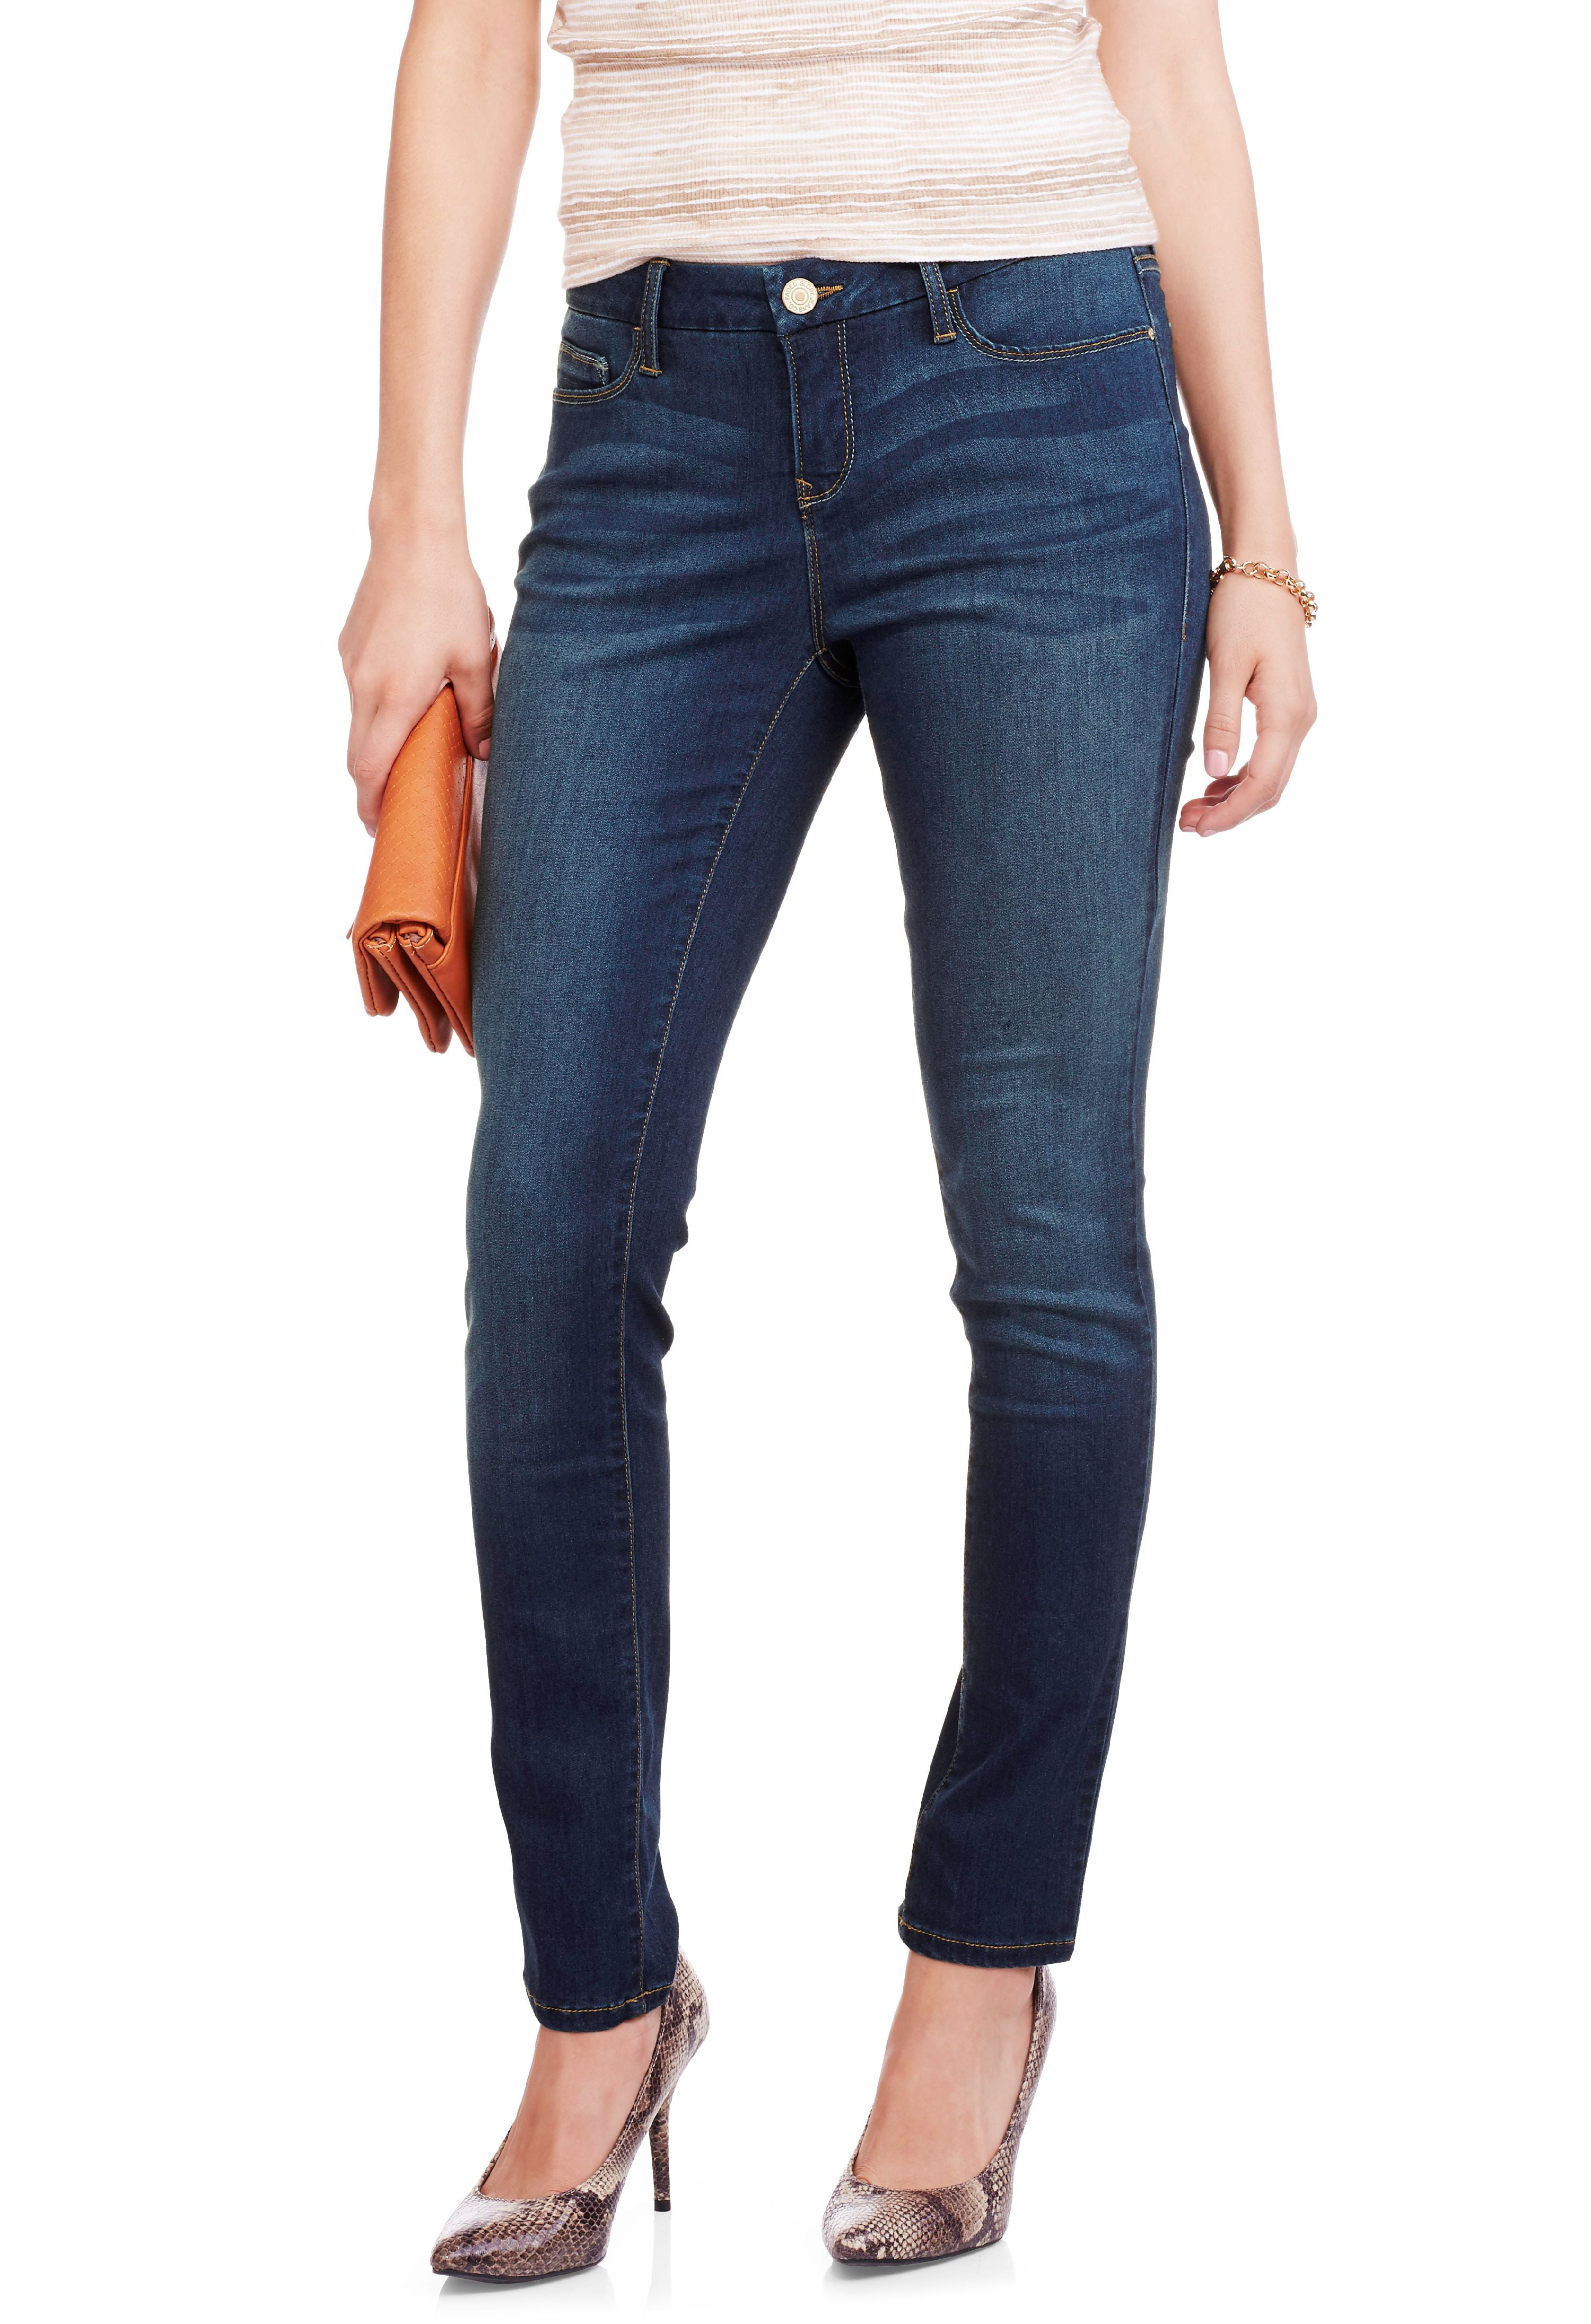 Faded Glory - Women's Mid Rise Skinny Jeans with Super Stretch ...